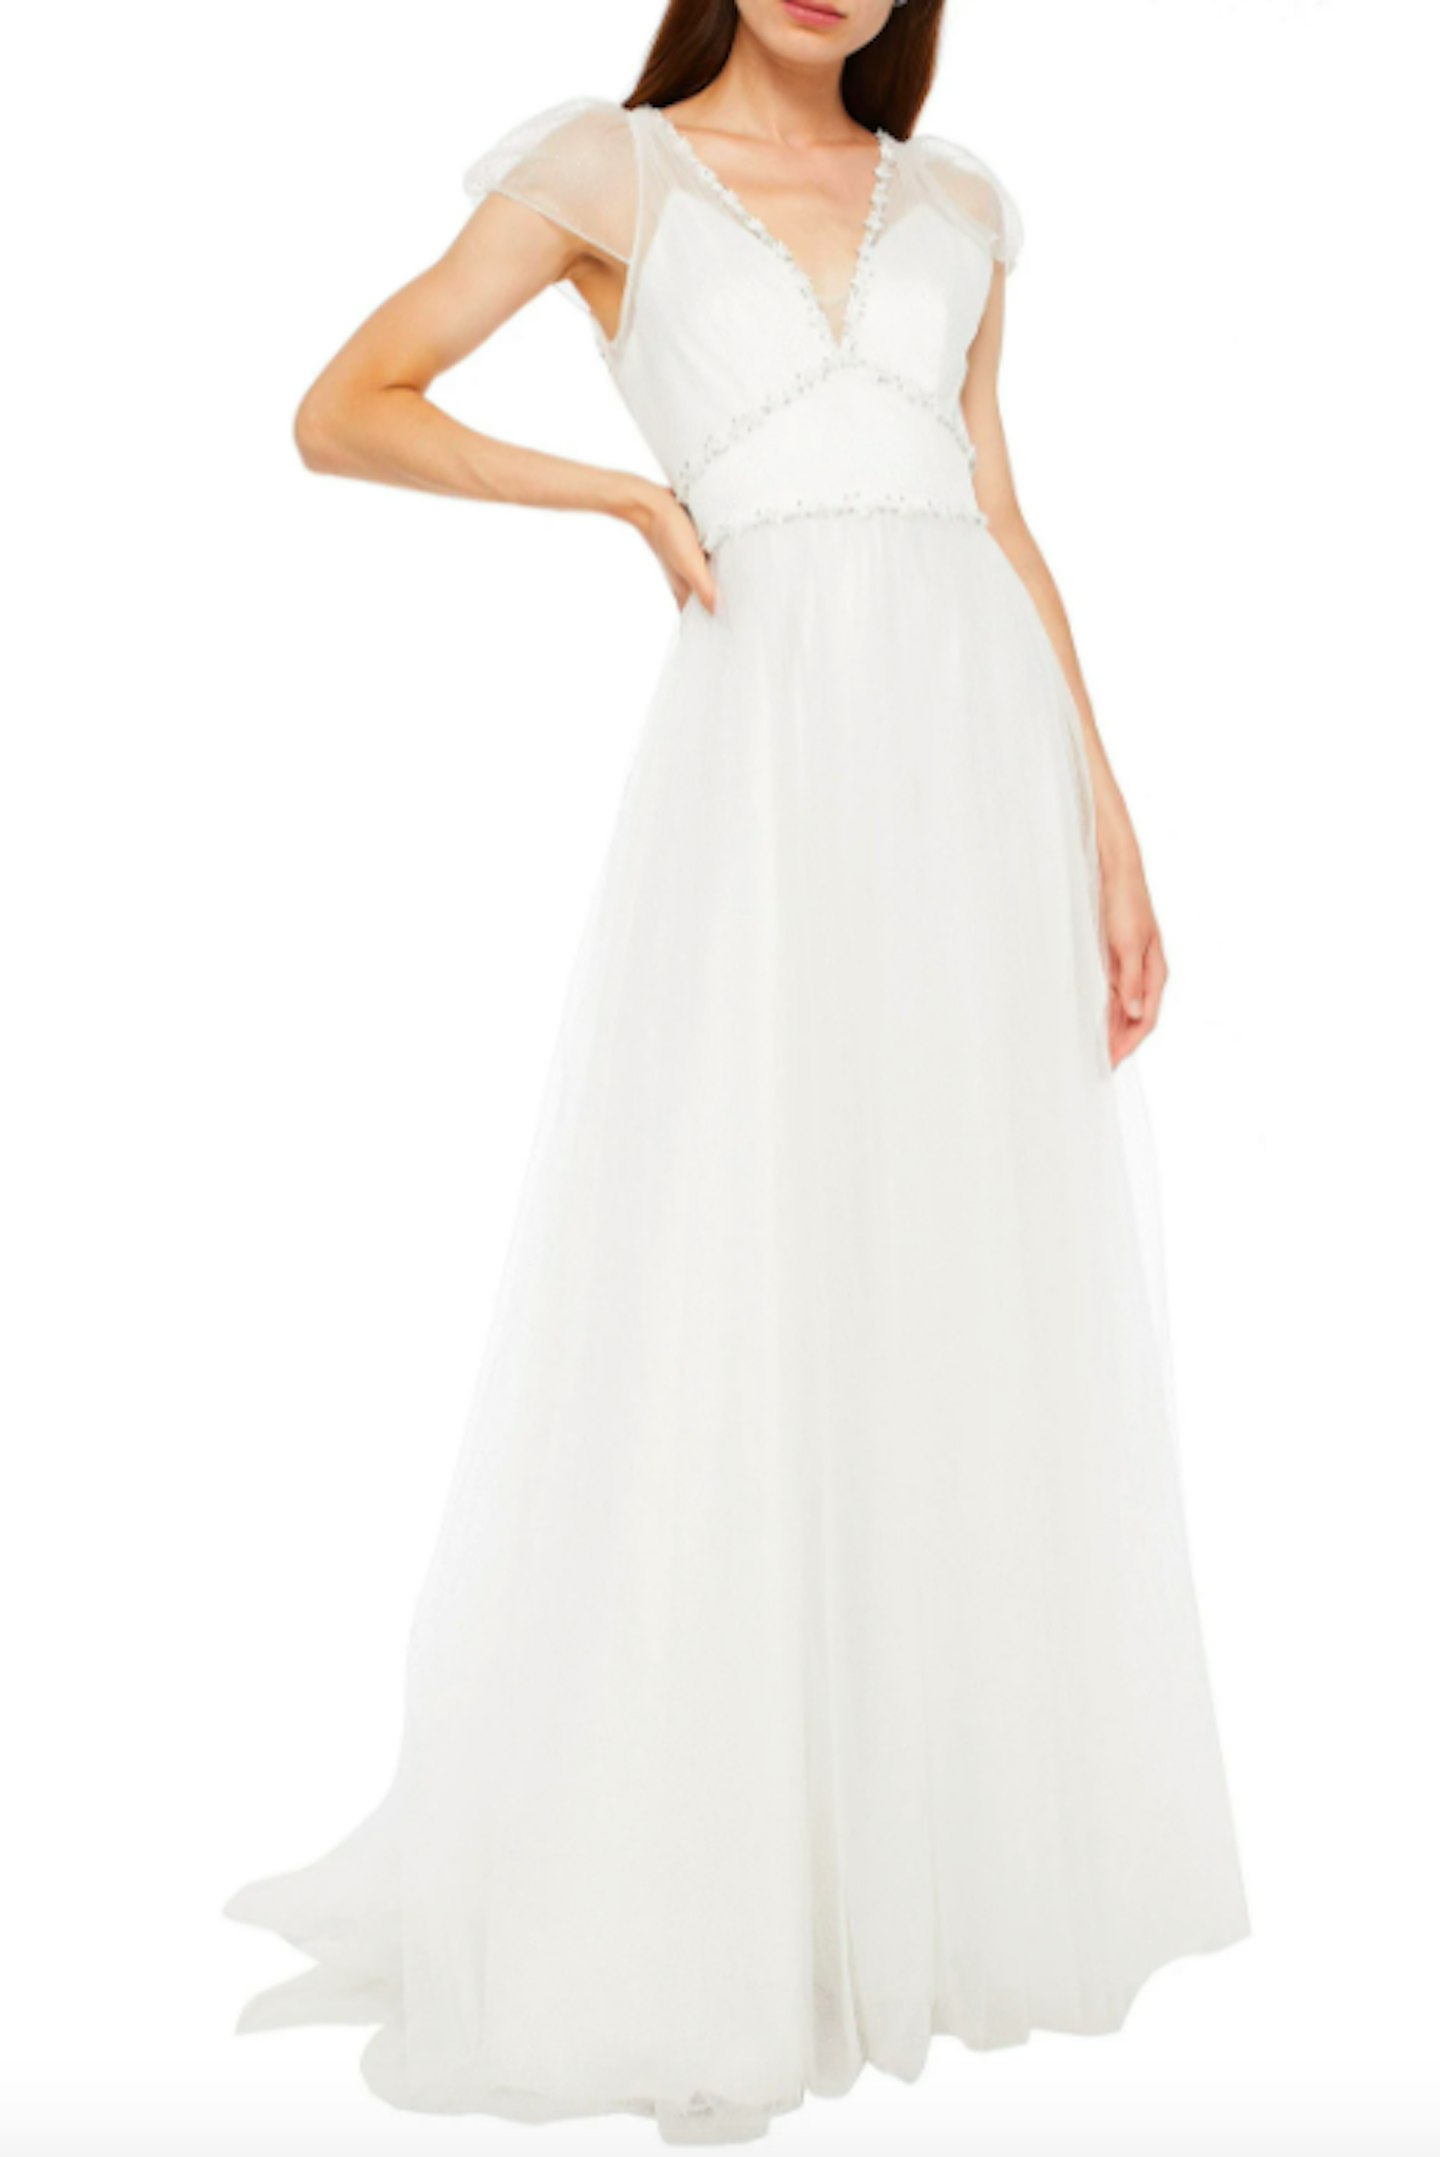 Gardenia Embellished Glittered Tulle Bridal Gown, £1,860